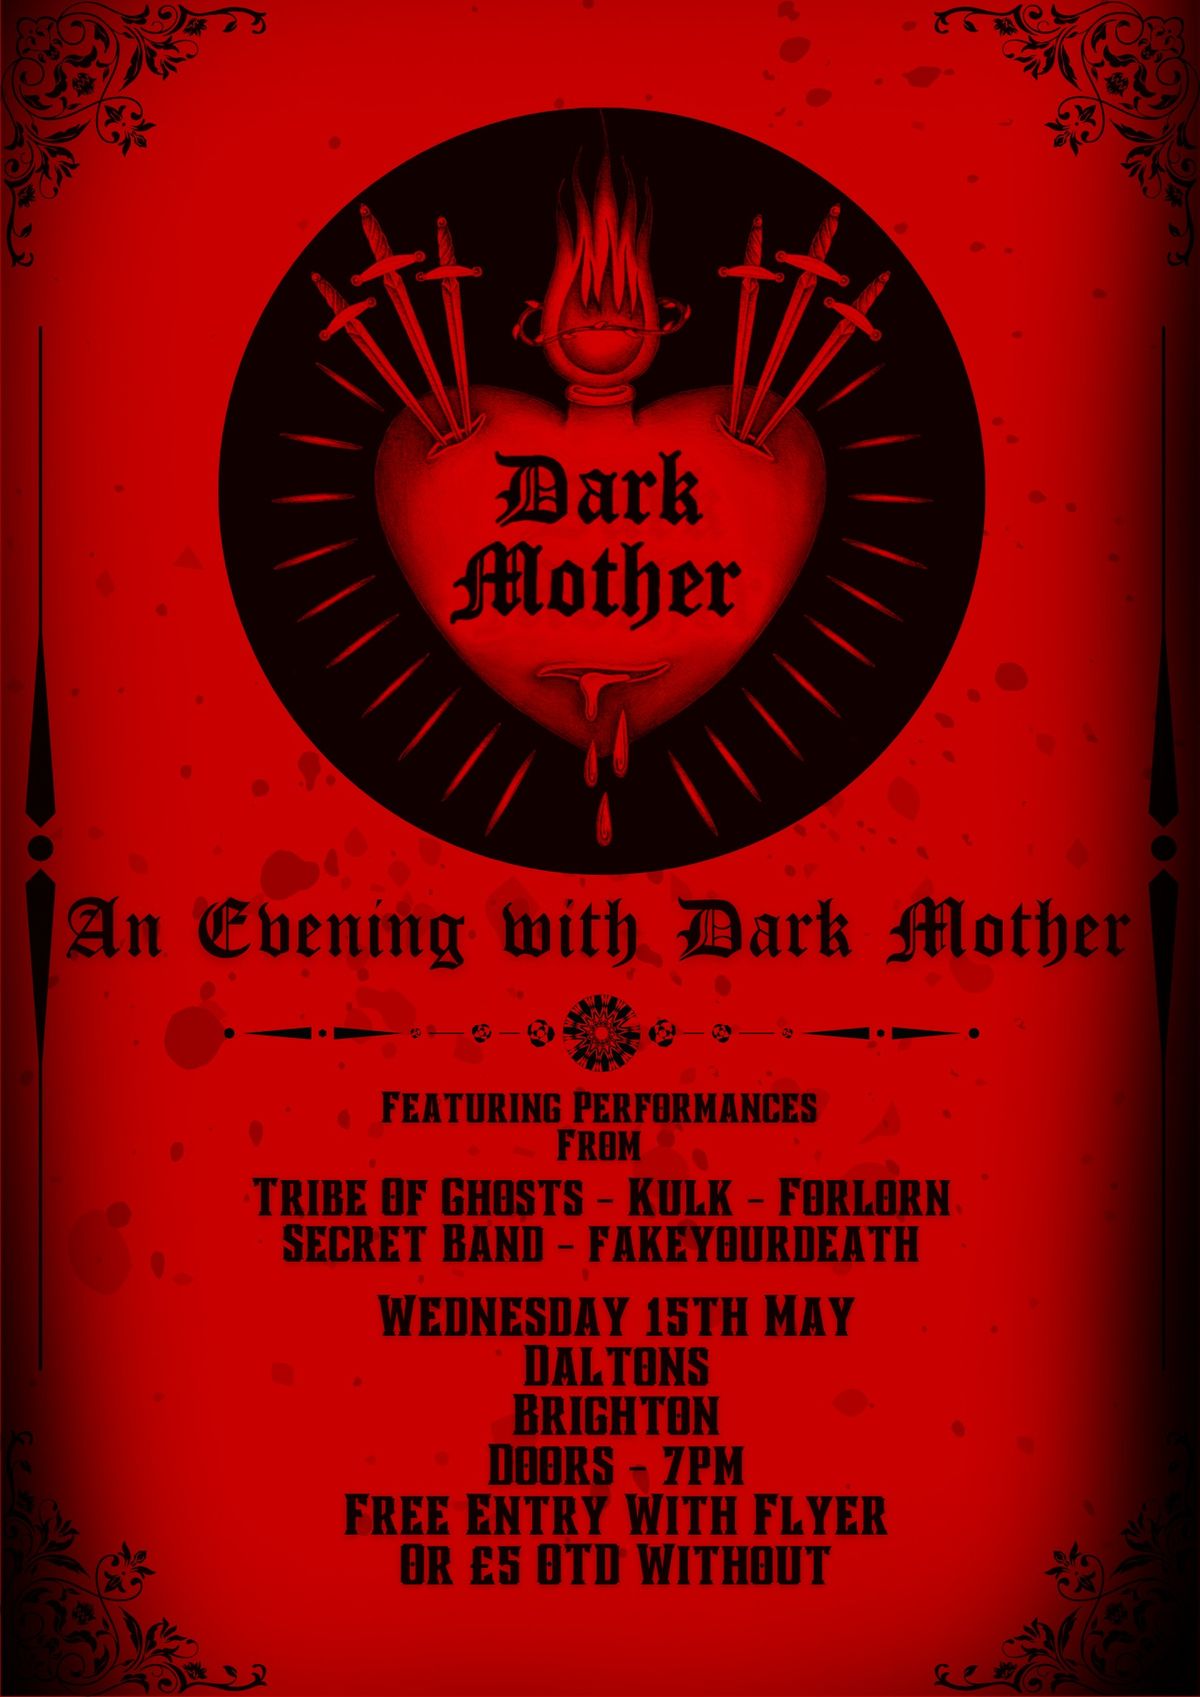 An Evening With Dark Mother